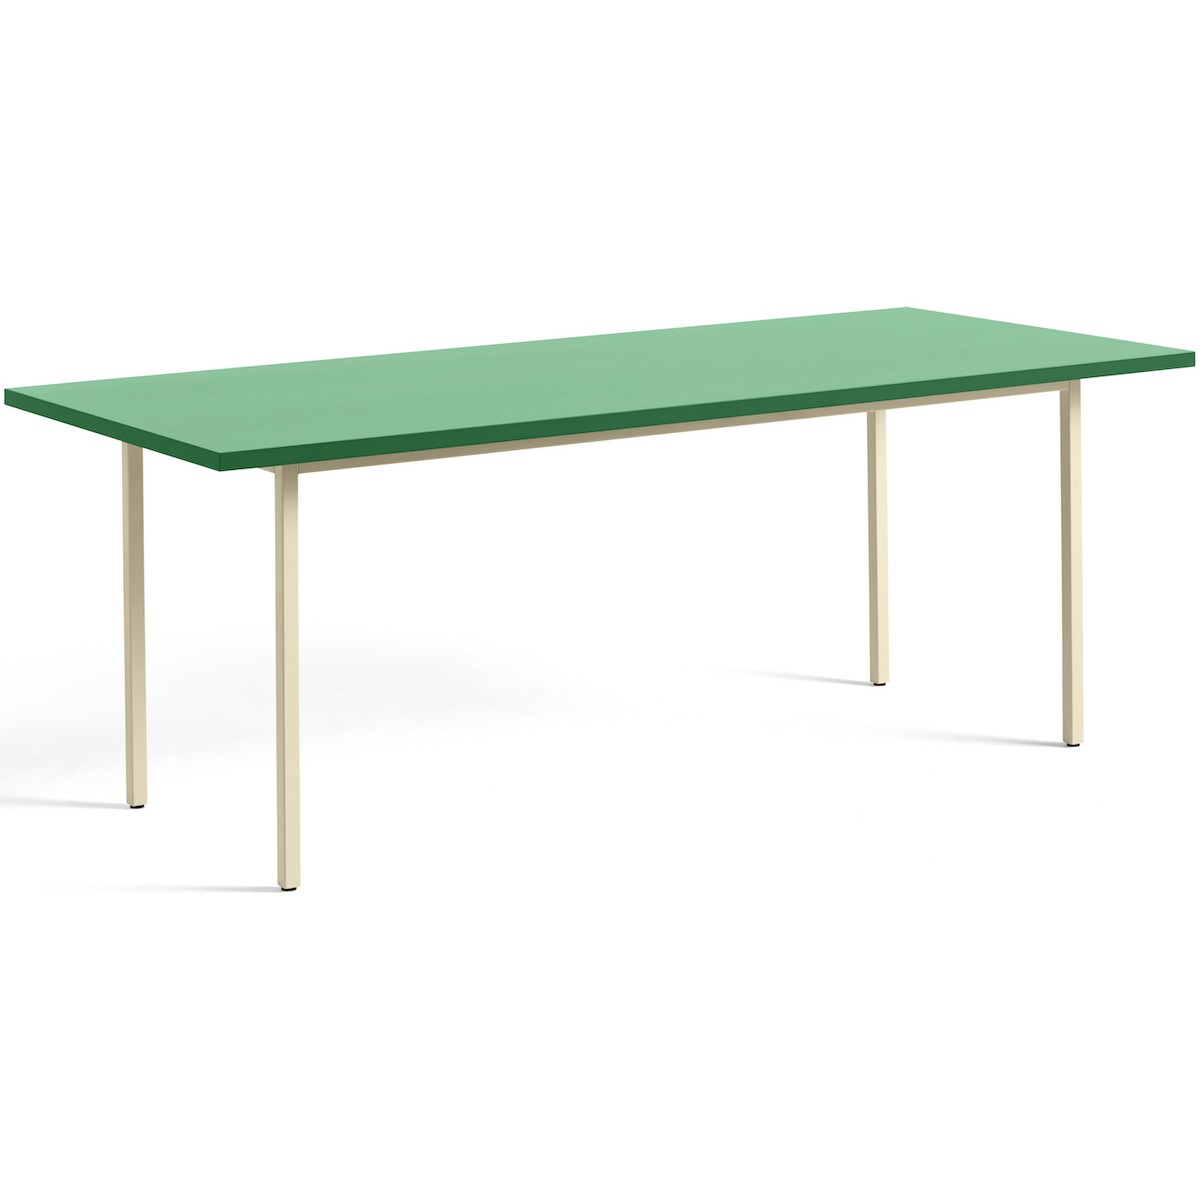 green / ivory - 200x90xH74 cm - TWO-COLOUR table